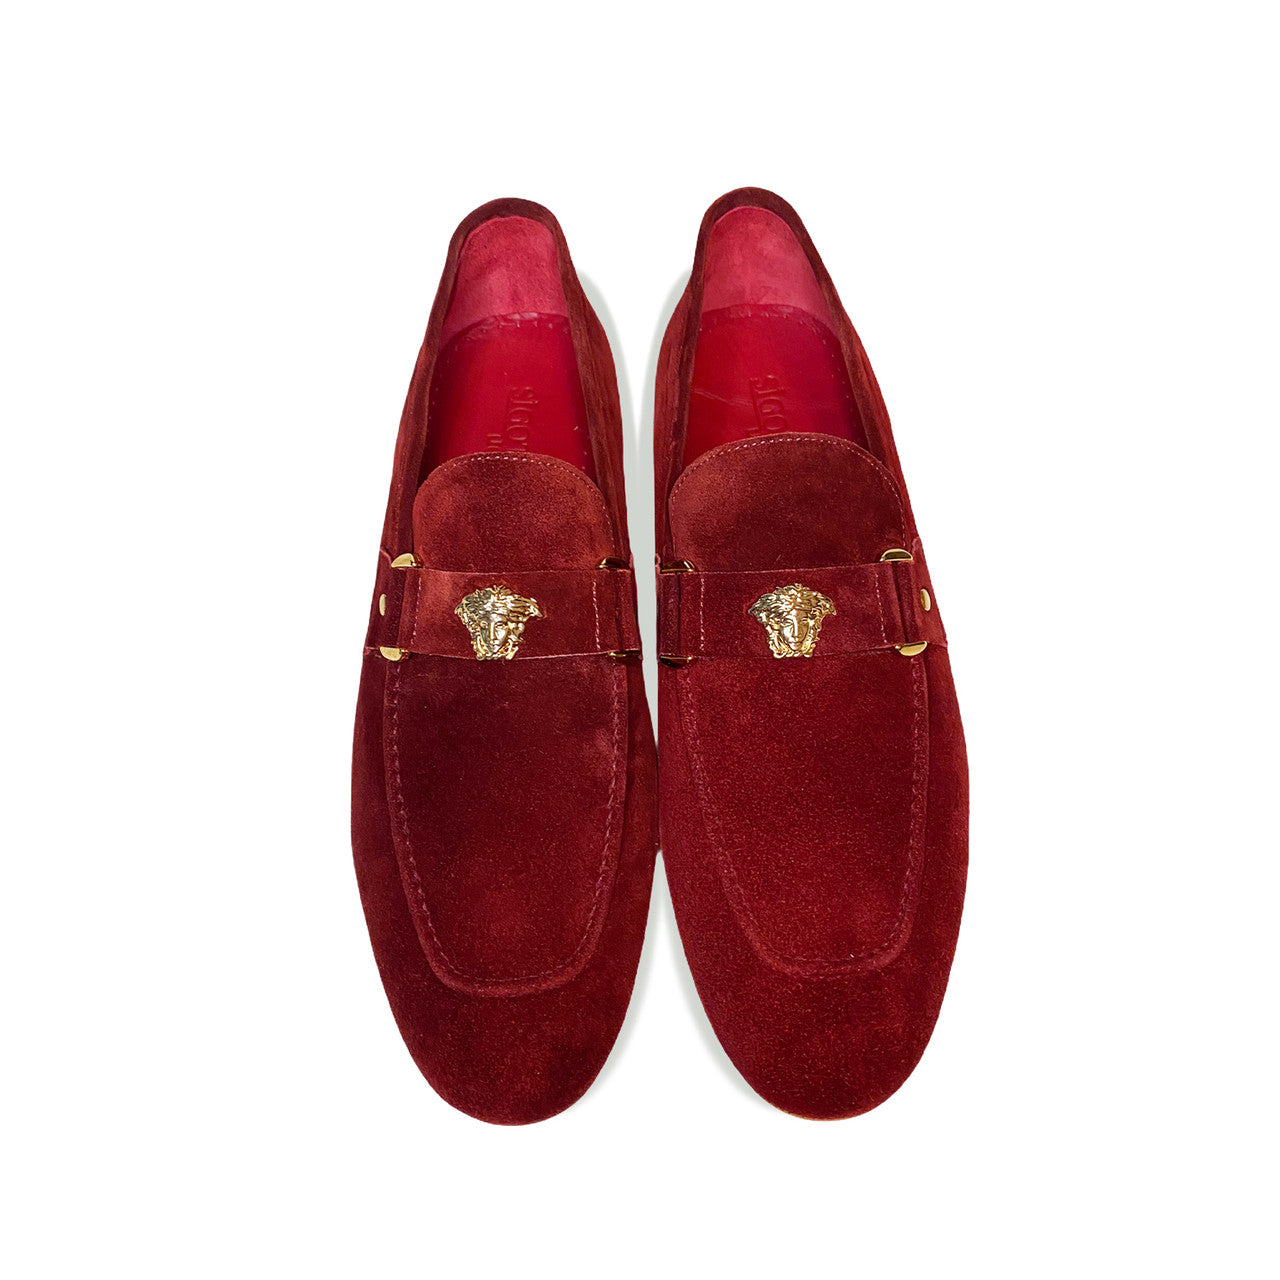 P000665-5229 Wine Suede Suede Loafer with Medusa ornament